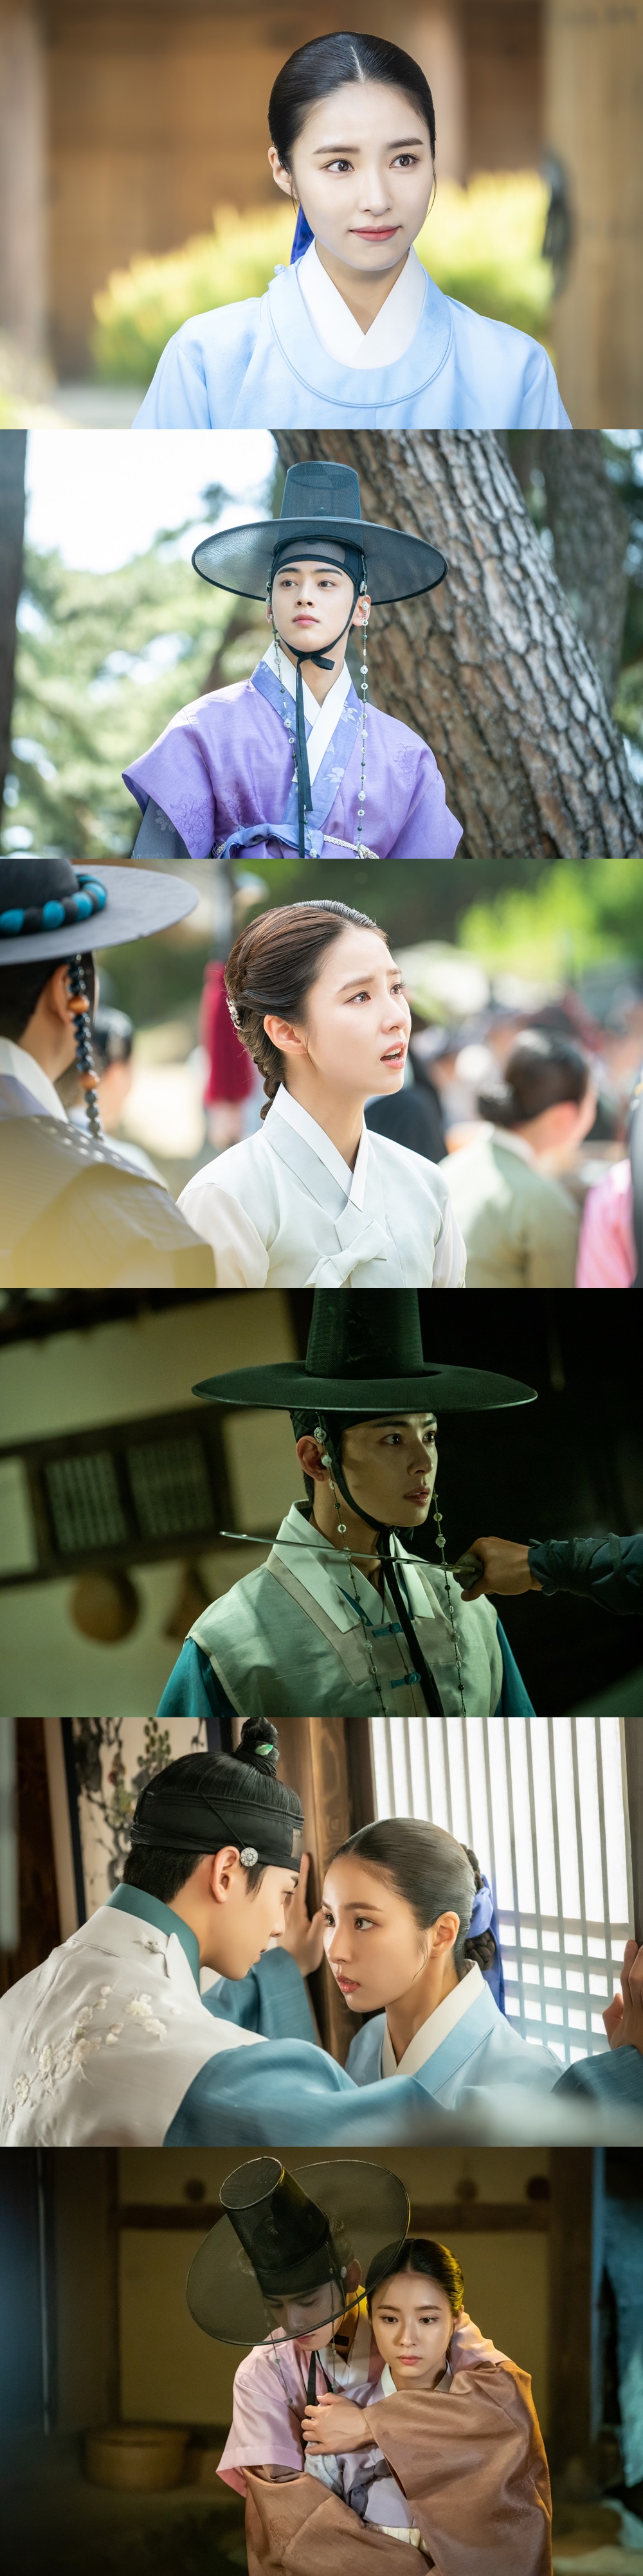 Shin Se-kyung - Cha Eun-woo, with mixed hearts, the viewer cried togetherMBC Wednesday-Thursday evening drama New Employee Rookie Historian Goo Hae-ryung (playwright Kim Ho-soo, directing Kang Il-soo, Han Hyun-hee  production Chorokbaem Media) which has been in the top spot of the audience rating since the first broadcast, has been in the audience rating for 6 consecutive weeks. He continued his career in the popular drama, maintaining the top spot.According to data released today on the first week of September, MBCs Rookie Historian Goo Hae-ryung has a 23.2% share of the Wednesday-Thursday evening drama, which ended this week with 20% of OCNs Mr. Period System, 12.3% of KBSs Justice, as well as MBN 11.3% of Elegance and 10.3% of TVNs Demon Call Your Name, which is more than twice the number of 10.3%, ranked first in the topic of the drama for 6 consecutive weeks.MBC Wednesday-Thursday evening drama New Entrepreneur Rookie Historian Goo Hae-ryung, which has been ranked number one in the audience rating of the unidentified drama since its first broadcast, is a fiction drama that plants precious seeds of change against the old truth that men and women are unique in the background of the 19th century Joseon Dynasty This is the first problematic Ada Lovelace (Rookie Historian Goo Hae-ryung (Shin Se-kyung) of Joseon and the full romance of Phil by Prince Lee Rim (Cha Eun-woo).Shin Se-kyung, the historical drama goddess, and Actor Cha Eun-woo, the next generation, and Park Ki-woong, who have been shining their presence through various works, have appeared in the house theater.In particular, Shin Se-kyungs performance, which shows perfect synchro rate with characters, is remarkable.Rookie Historian Goo Hae-ryung, a yangban house master, is the first Ada Lovelace in Korea through marriage and a star poem, and is an active figure in love as well as walking the degree of military officer in the court where power and darkness are dizzying.Shin Se-kyung is not living in response to universal values, but is supported by viewers by drawing Rookie Historian Goo Hae-ryung, who leads life independently with his own choice and will.In addition, Cha Eun-woo of Irim Station of Dowon Daegun, who expressed himself only by writing love novels while being disconnected from the world, was well received for expressing the pure feeling of the early stage with a unique clear energy.Here, Rookie Historian Goo Hae-ryung meets the world and love and delicately depicts the growth of the prince and man, solidifying his position as an actor.Viewers also show support and support, saying, The Korean version of Girl Crush Na Hae-ryung is different from the existing historical drama Yeoju. I cried when I was in a hurry. I was aware of Lee Lim and changed my eyes.On the other hand, New Entrance Rookie Historian Goe-ryung 33 ~ 34 times, starring Shin Se-kyung, Cha Eun-woo and Park Ki-woong, will be broadcasted at 8:55 pm on Wednesday, 18th due to the Chuseok holiday break.iMBC  Photos: Chorokbaem Media